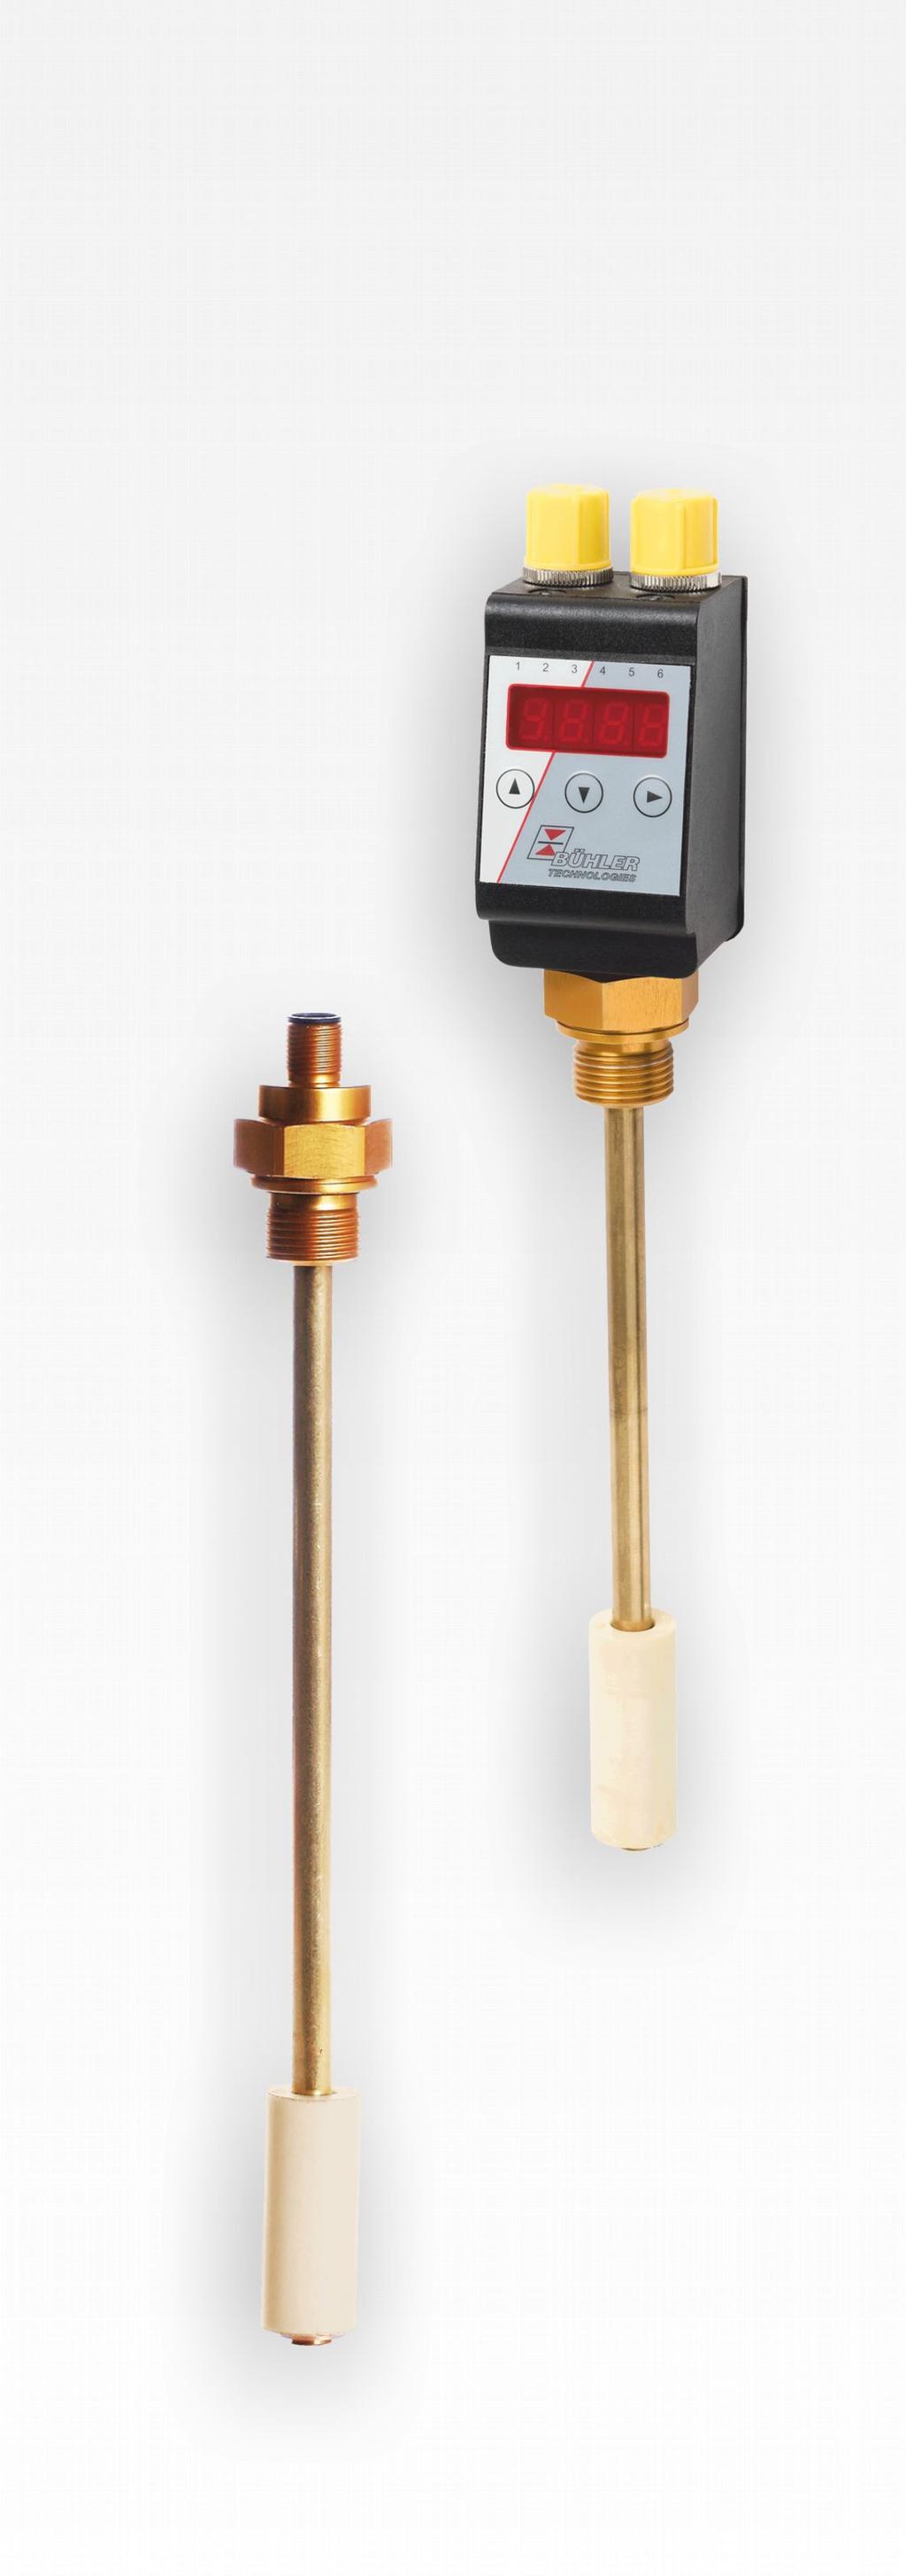 Level switch Nivotemp, Fluidcontrol In hydraulics and lubrication technology the fill level of oil tanks needs to be monitored continuously. ere, modern factory automation requires compatible signals.